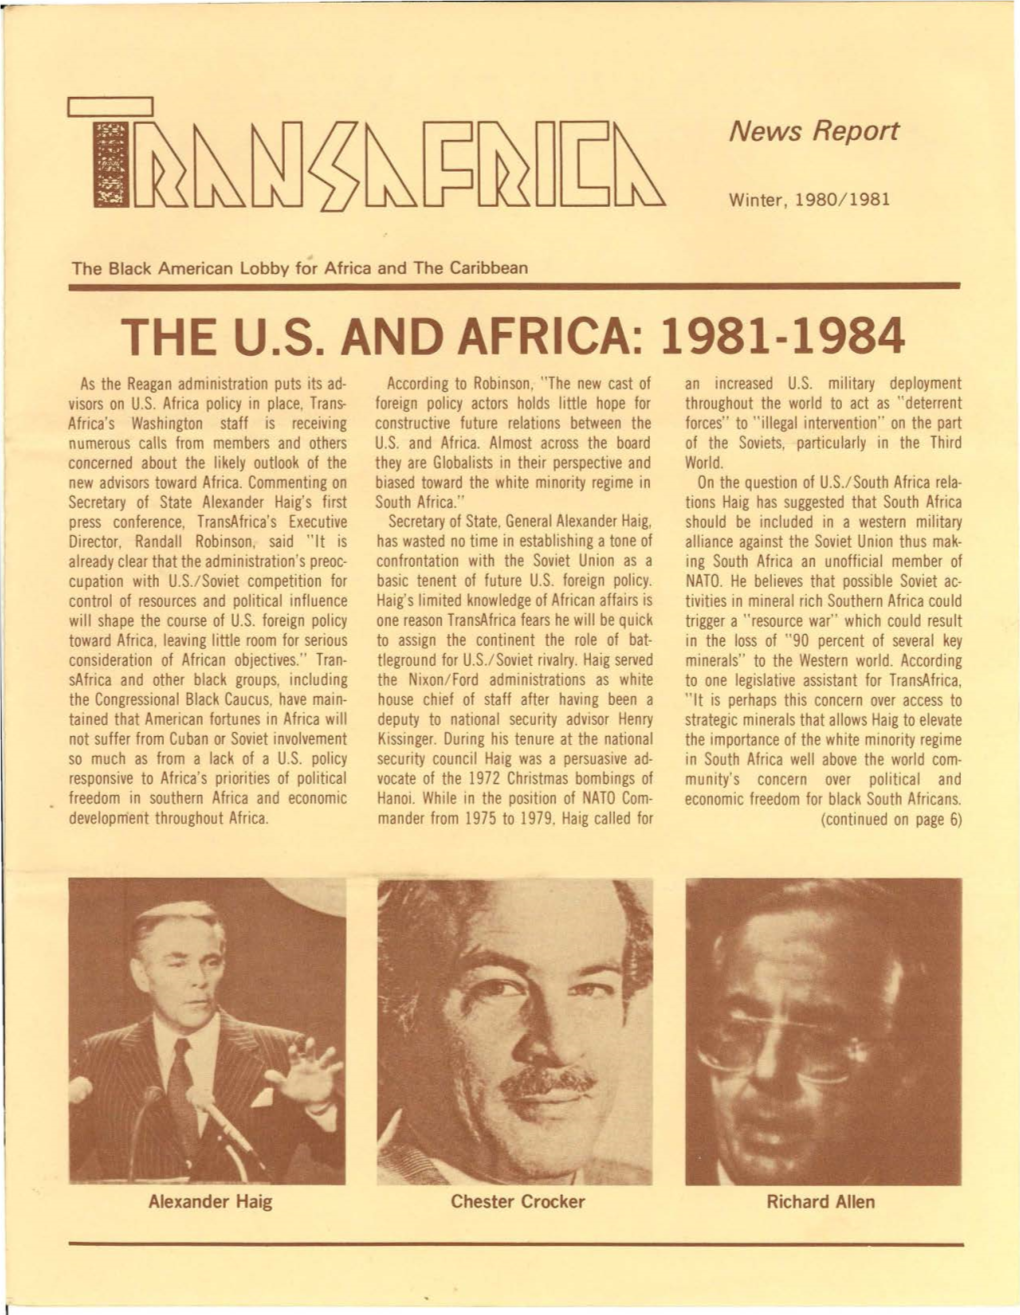 The Us and Africa